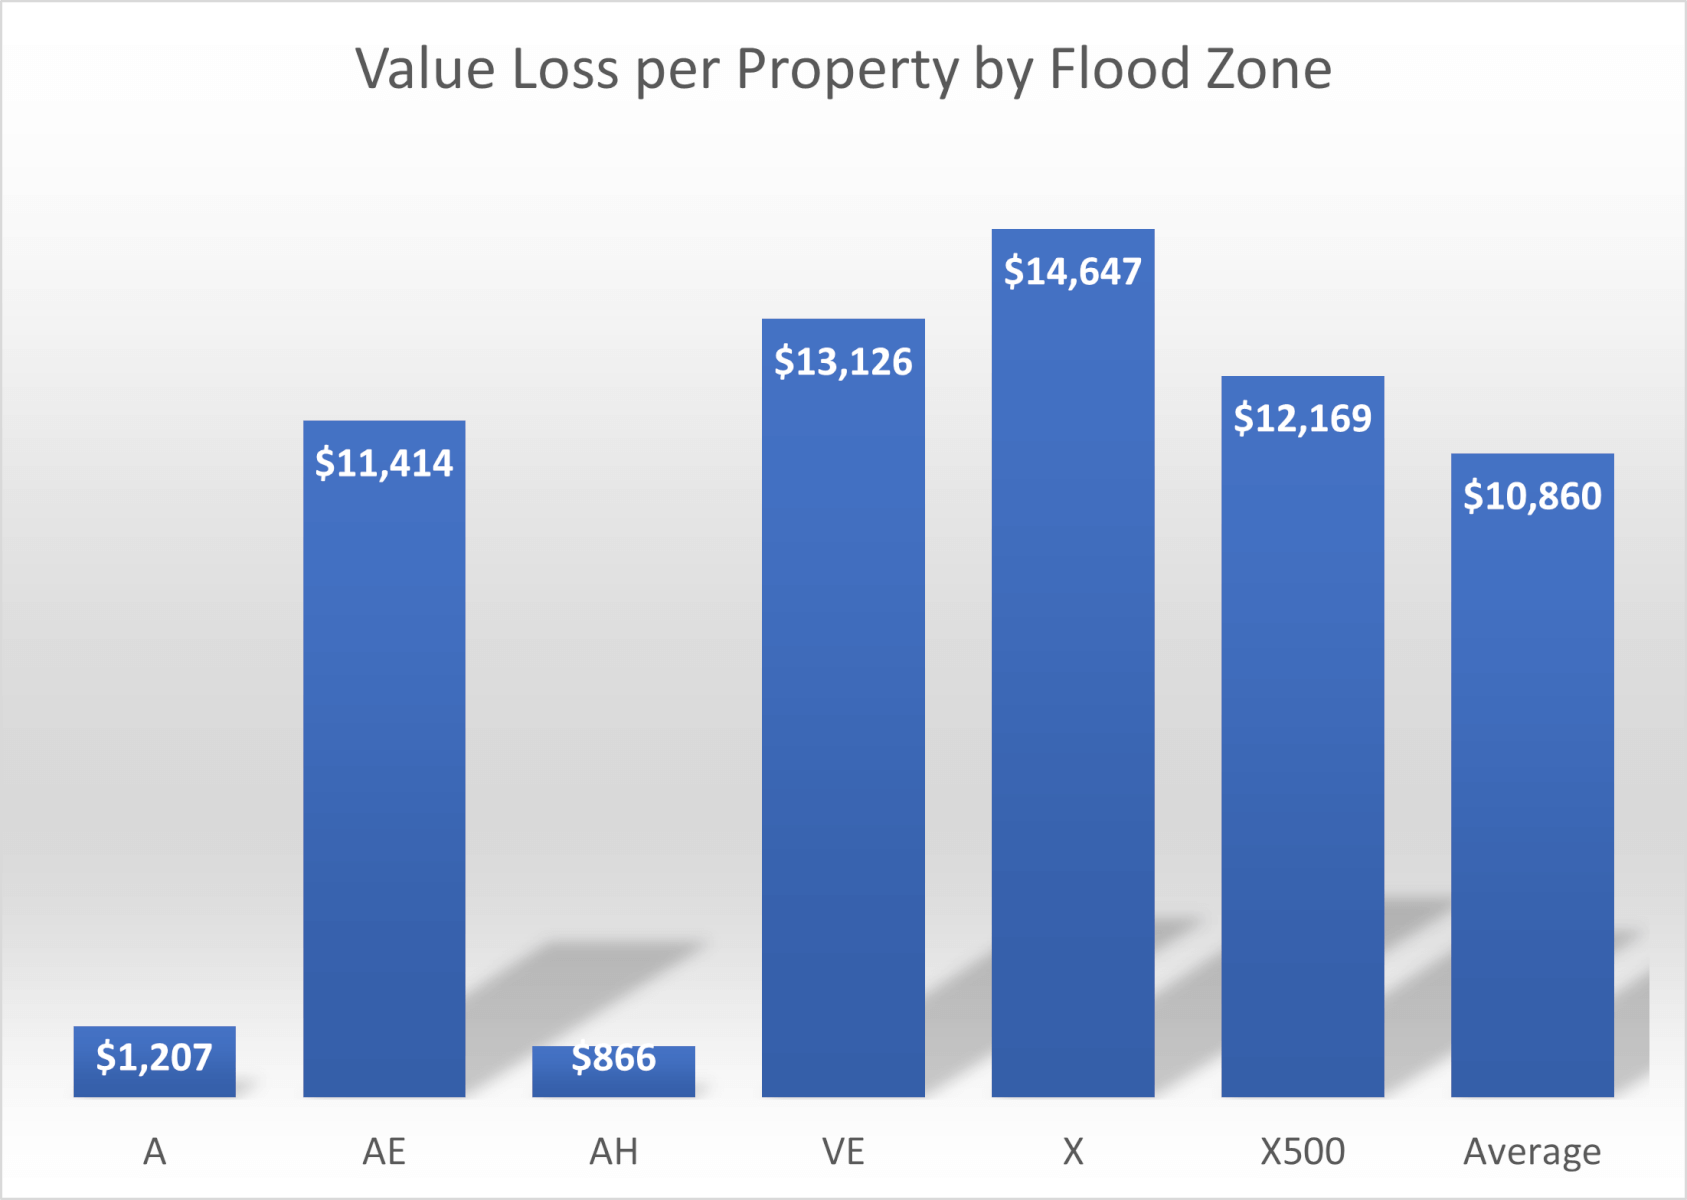 Figure 3: Value loss per property by flood zones